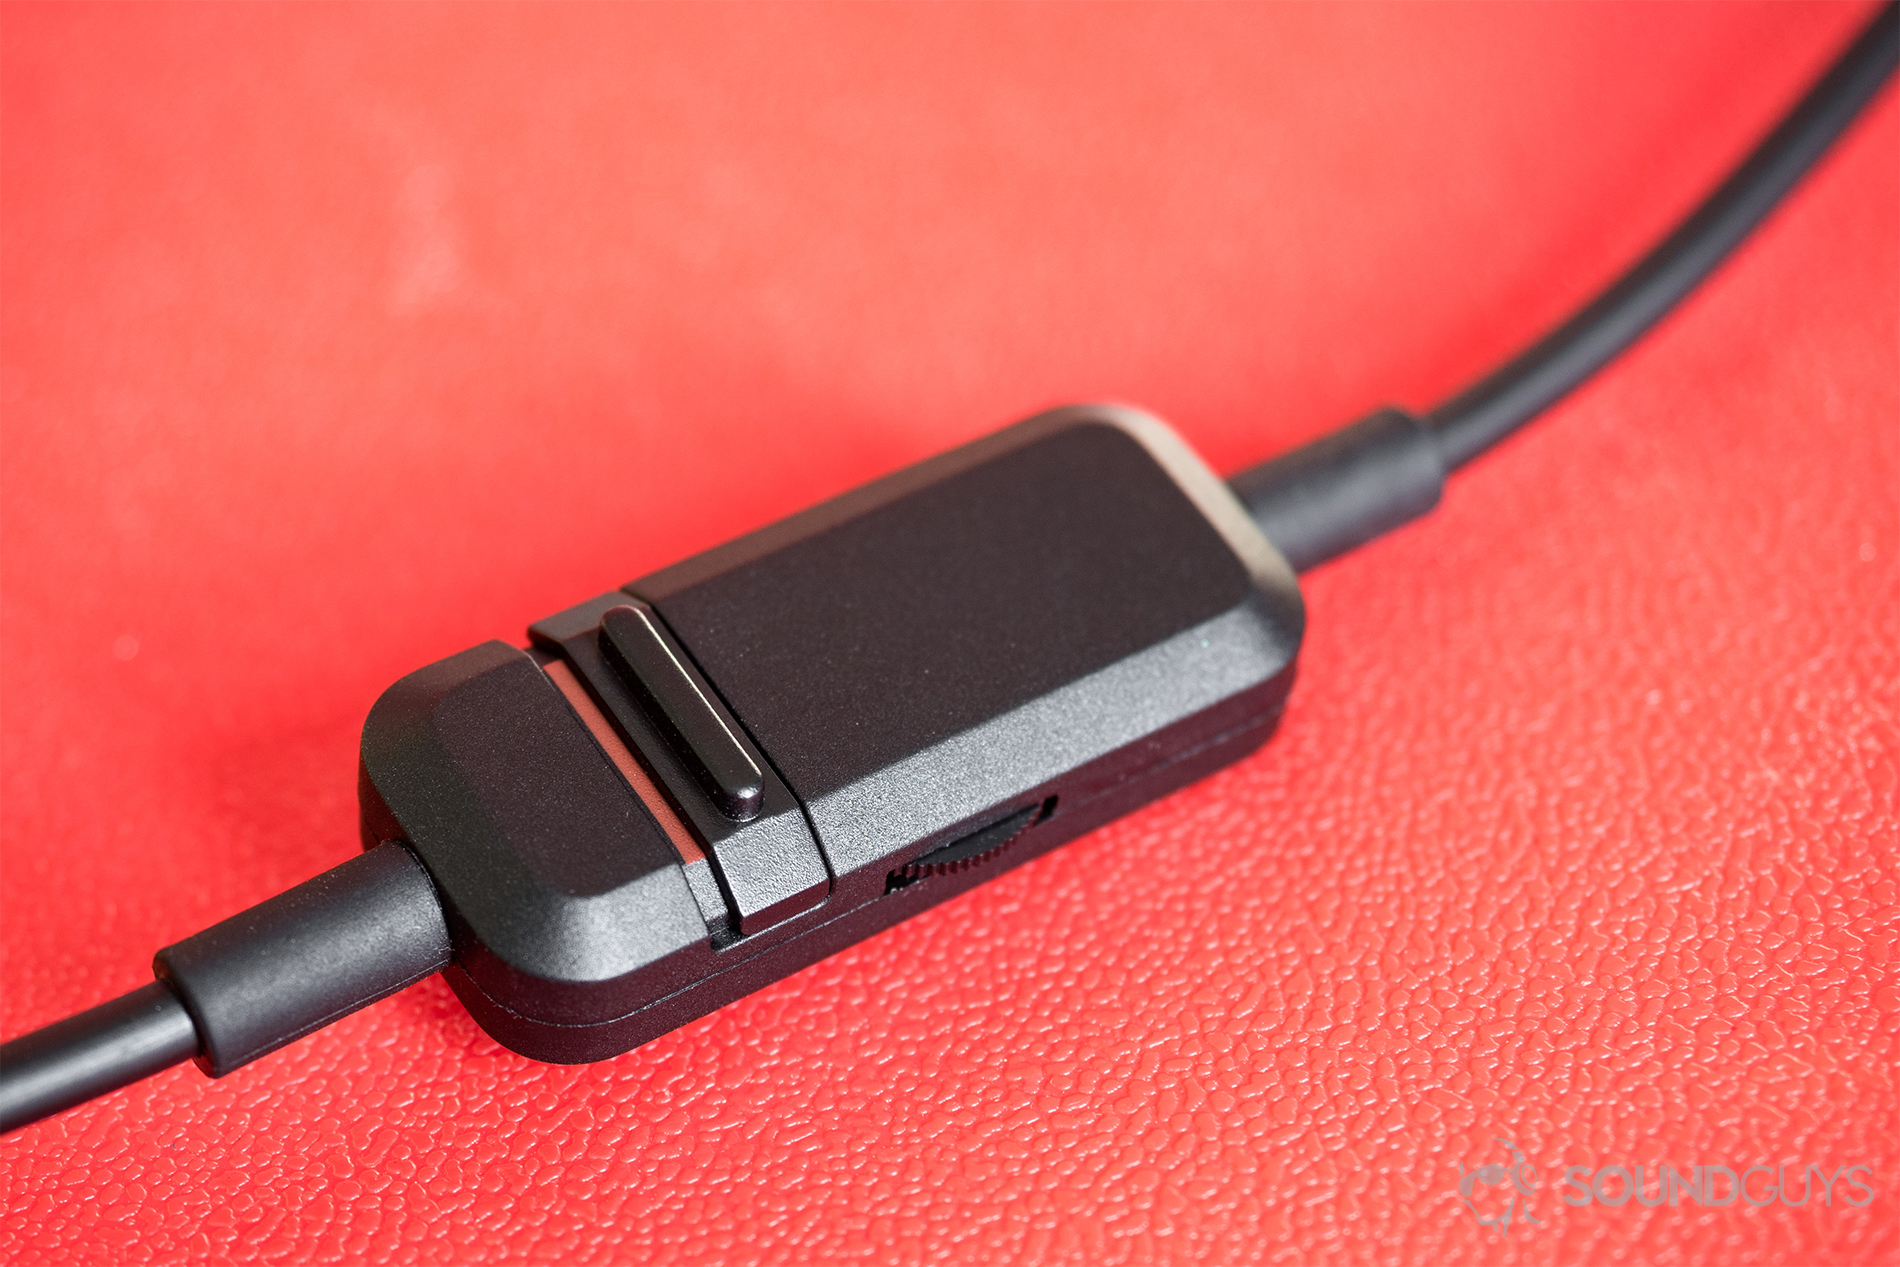 Beyerdyanamic CUSTOM Game: A close-up of the in-line remote/mic on a red background.